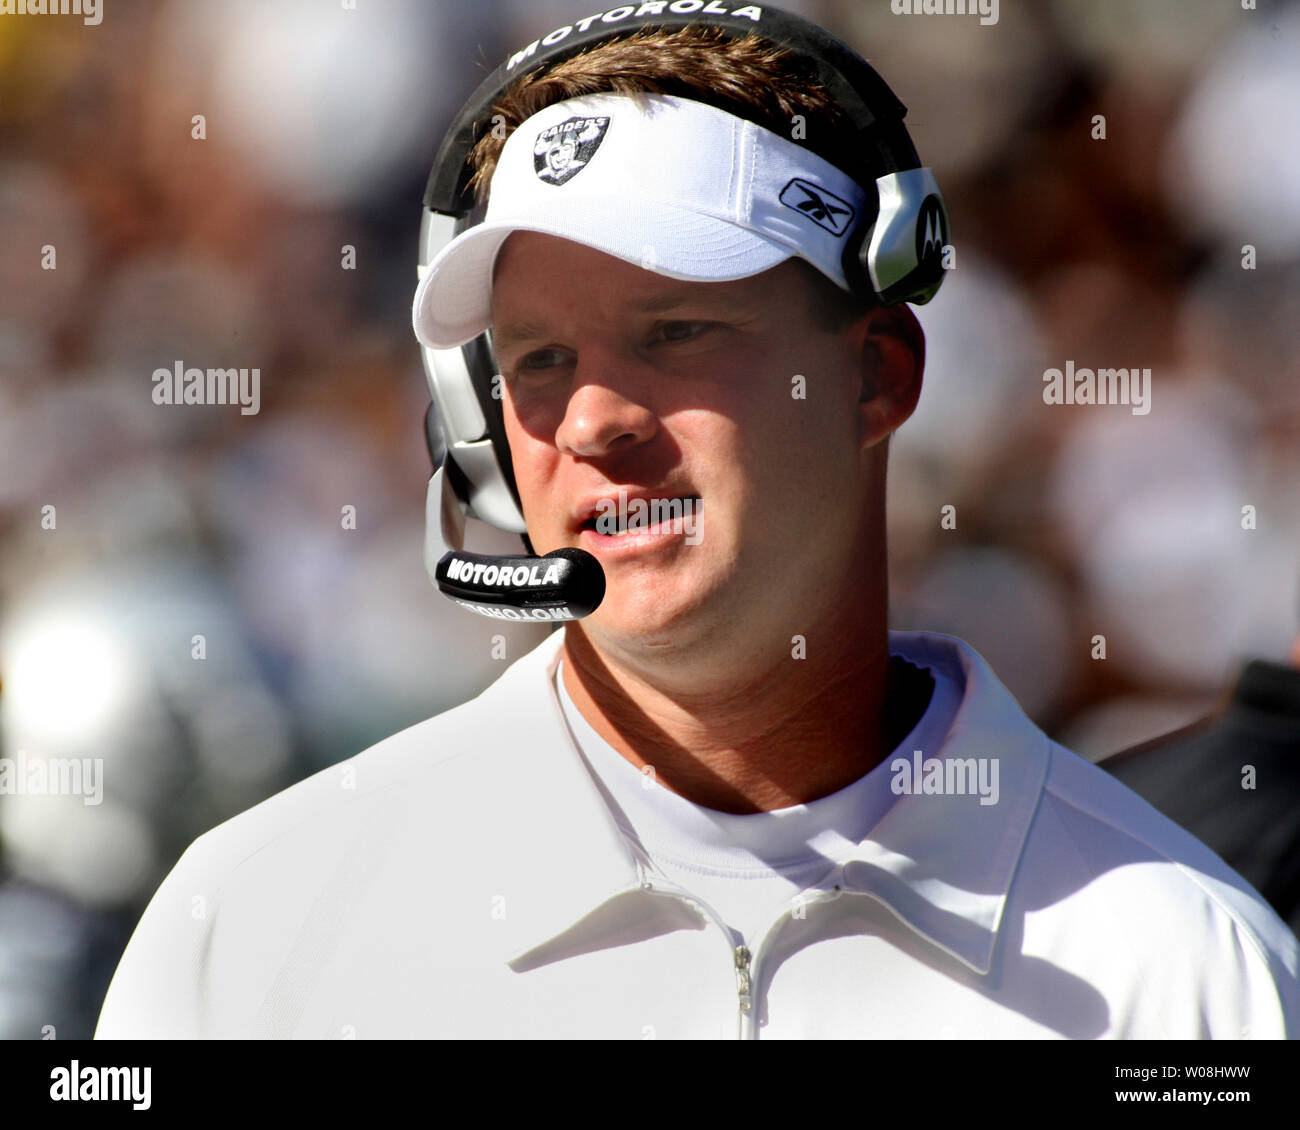 Oakland Raiders Head Coach Lane Kiffin directs his team against the Kansas City Chiefs at Network Associates Coliseum in Oakland, California on October 21, 2007. The Chiefs defeated the Raiders 12-10.   (UPI Photo/Terry Schmitt) Stock Photo